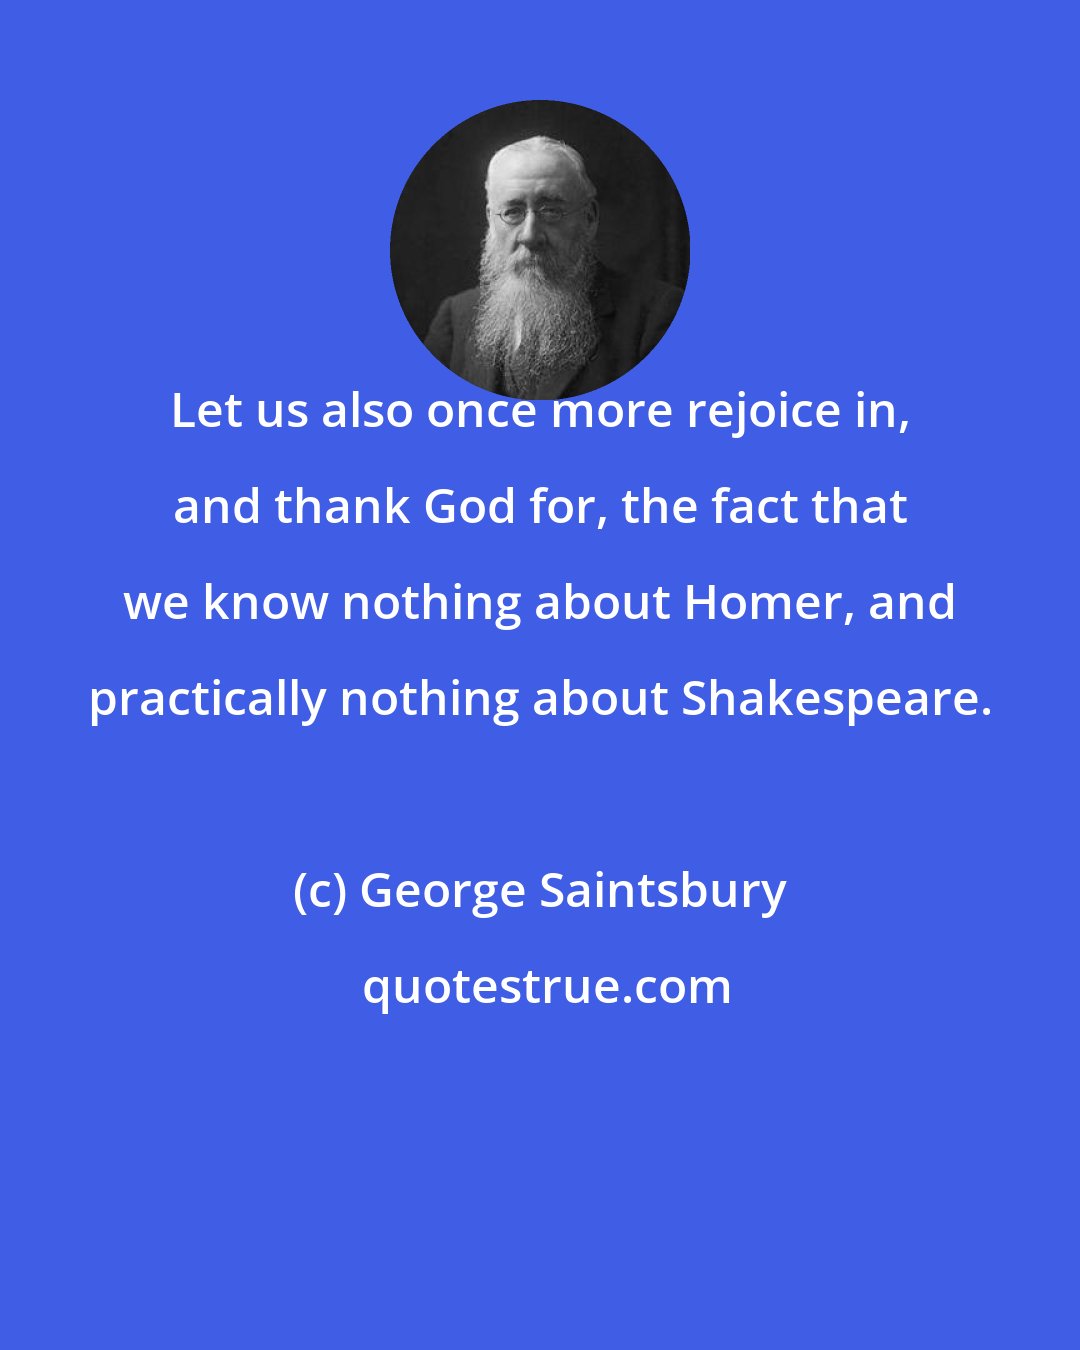 George Saintsbury: Let us also once more rejoice in, and thank God for, the fact that we know nothing about Homer, and practically nothing about Shakespeare.